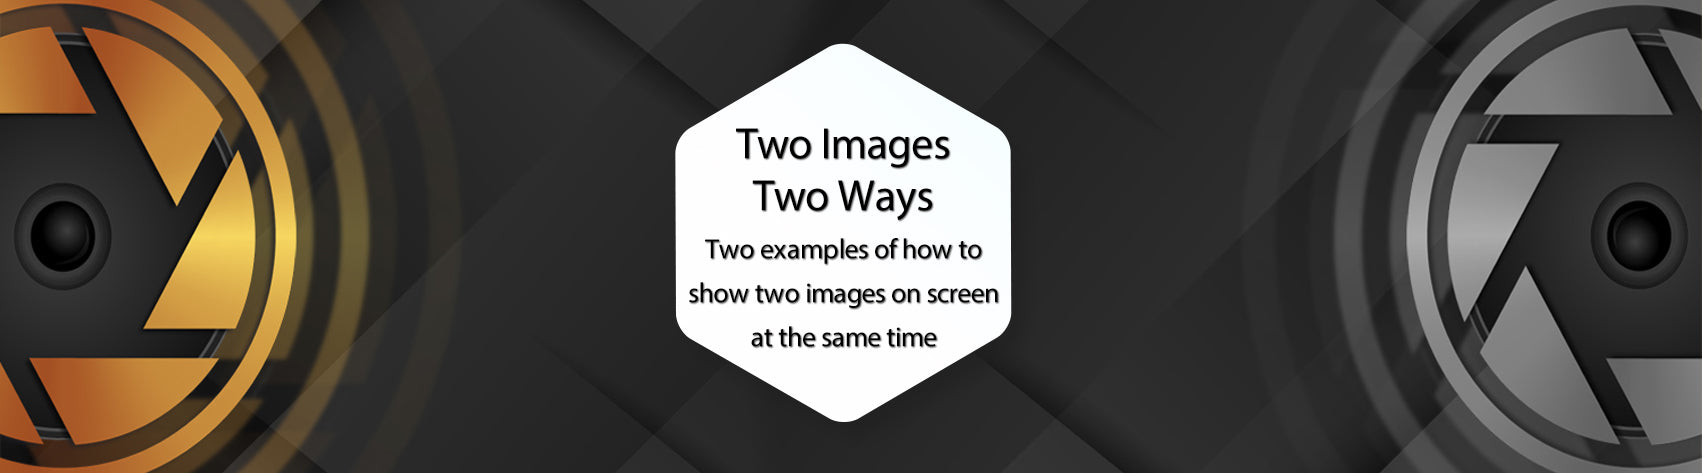 Two Images - Two Ways